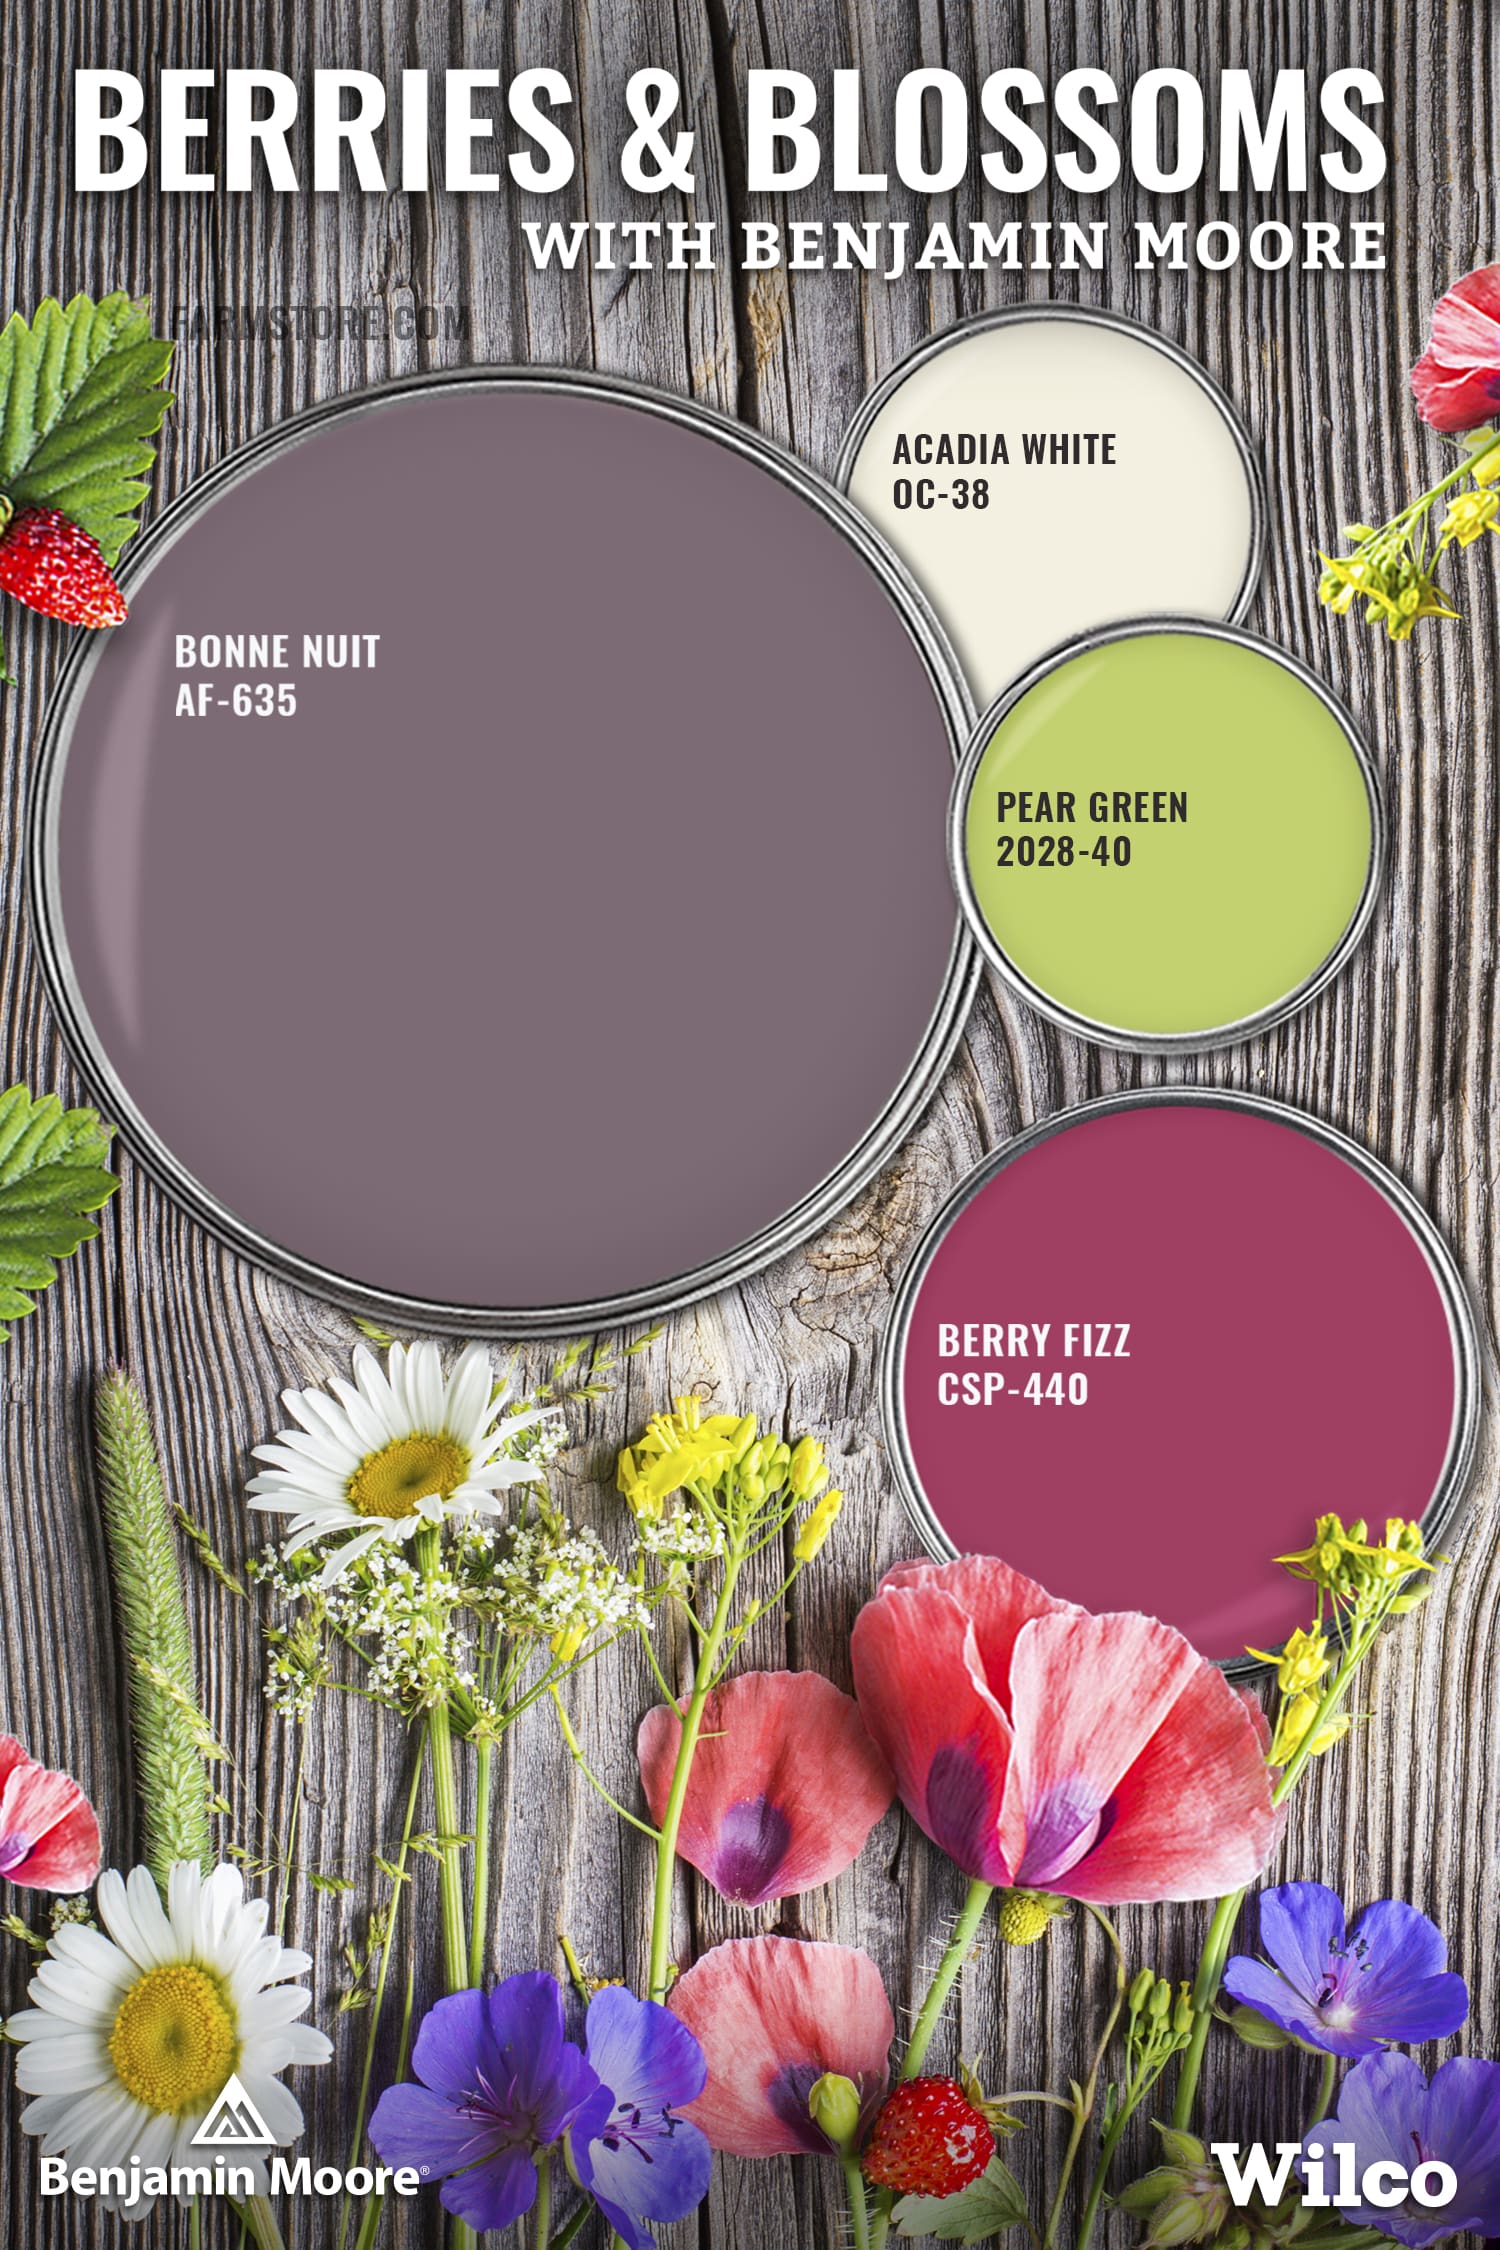 composite of paint can lids with wild flowers and strawberries on barn wood